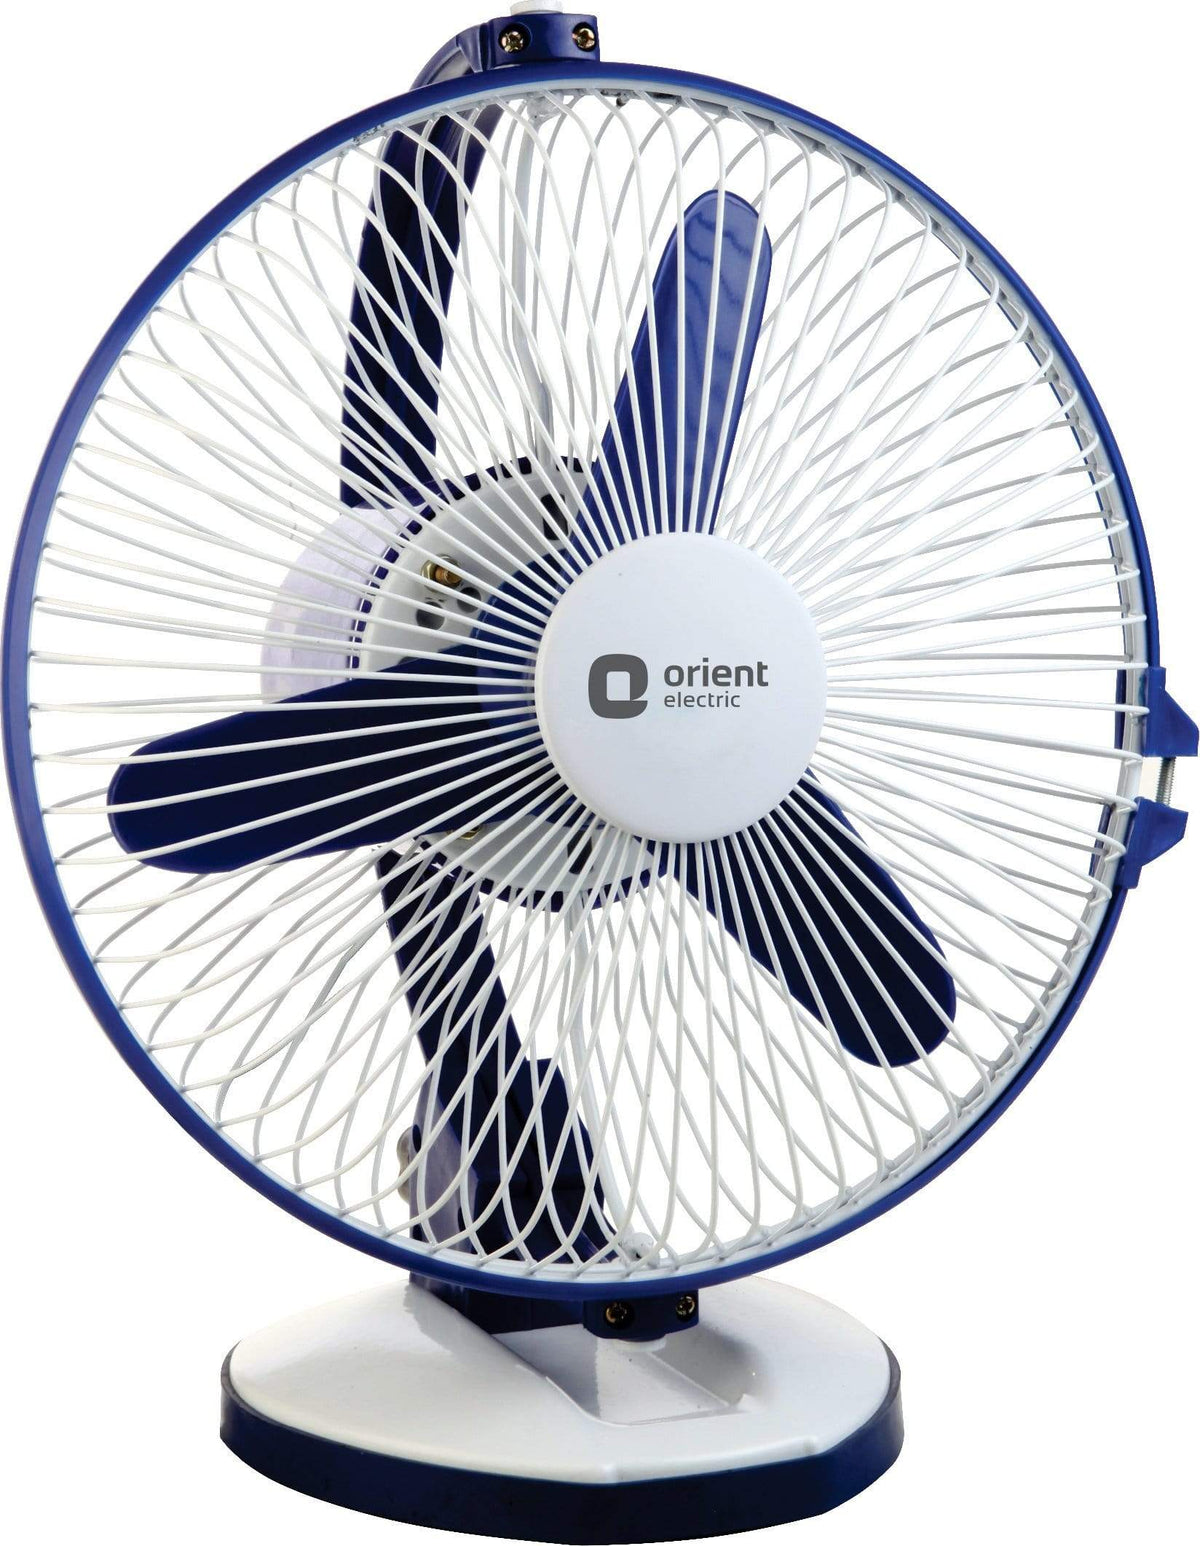 Orient Electric Zippy 225mm 2-in-1 Wall Mount and Table Top Fan (White/Blue) - KITCHEN MART